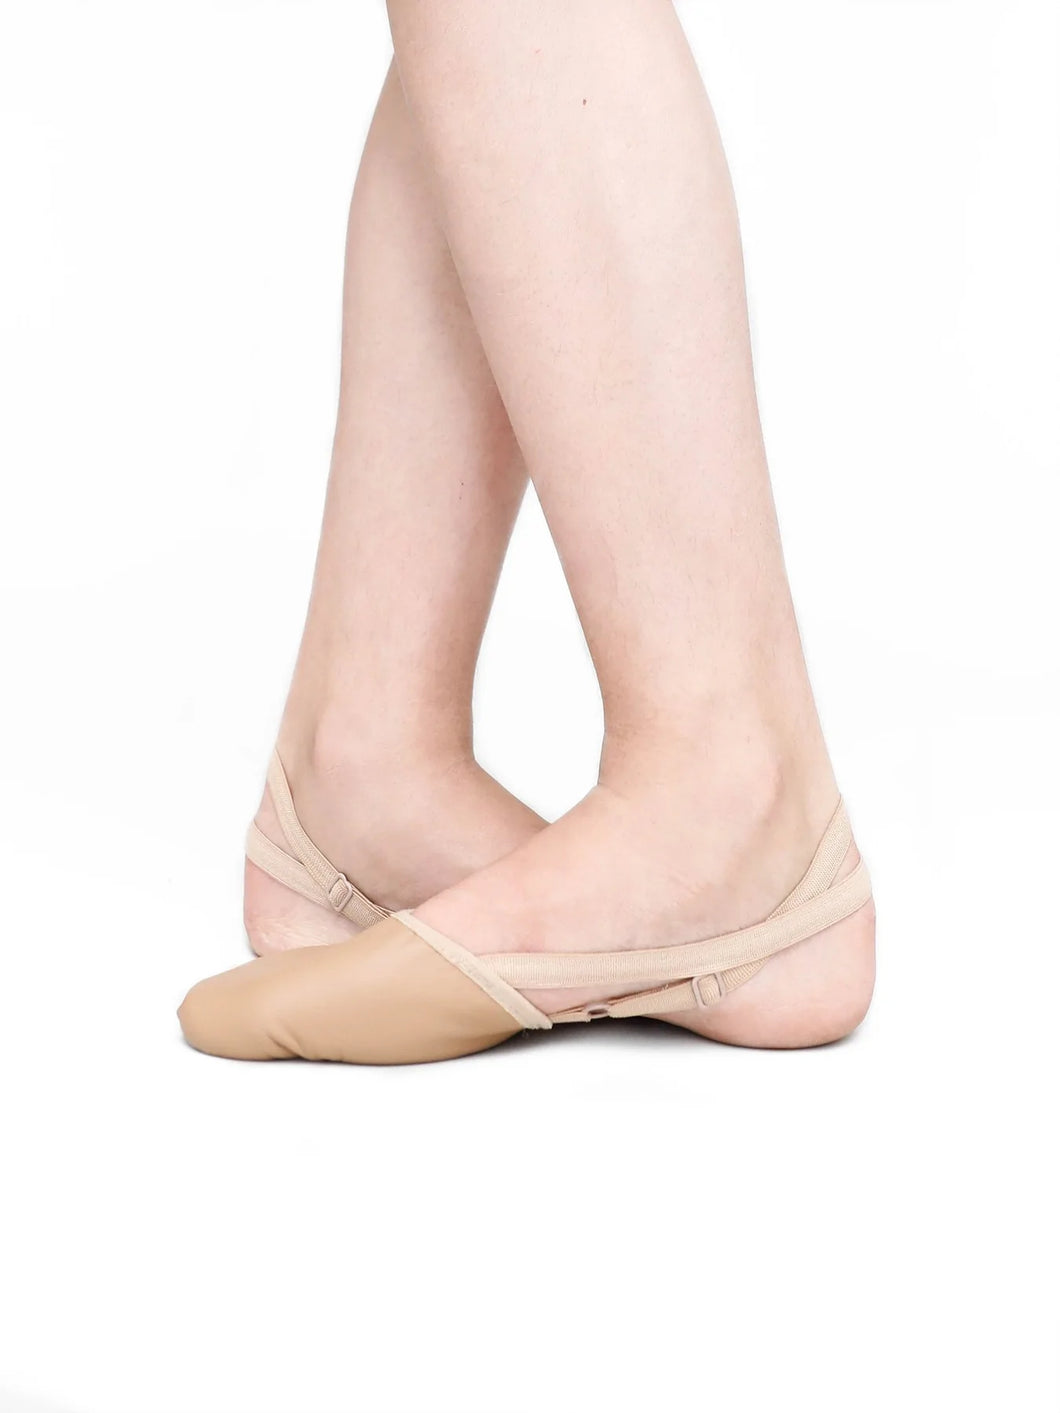 Pirouette 621A Angelo Luzio Adult